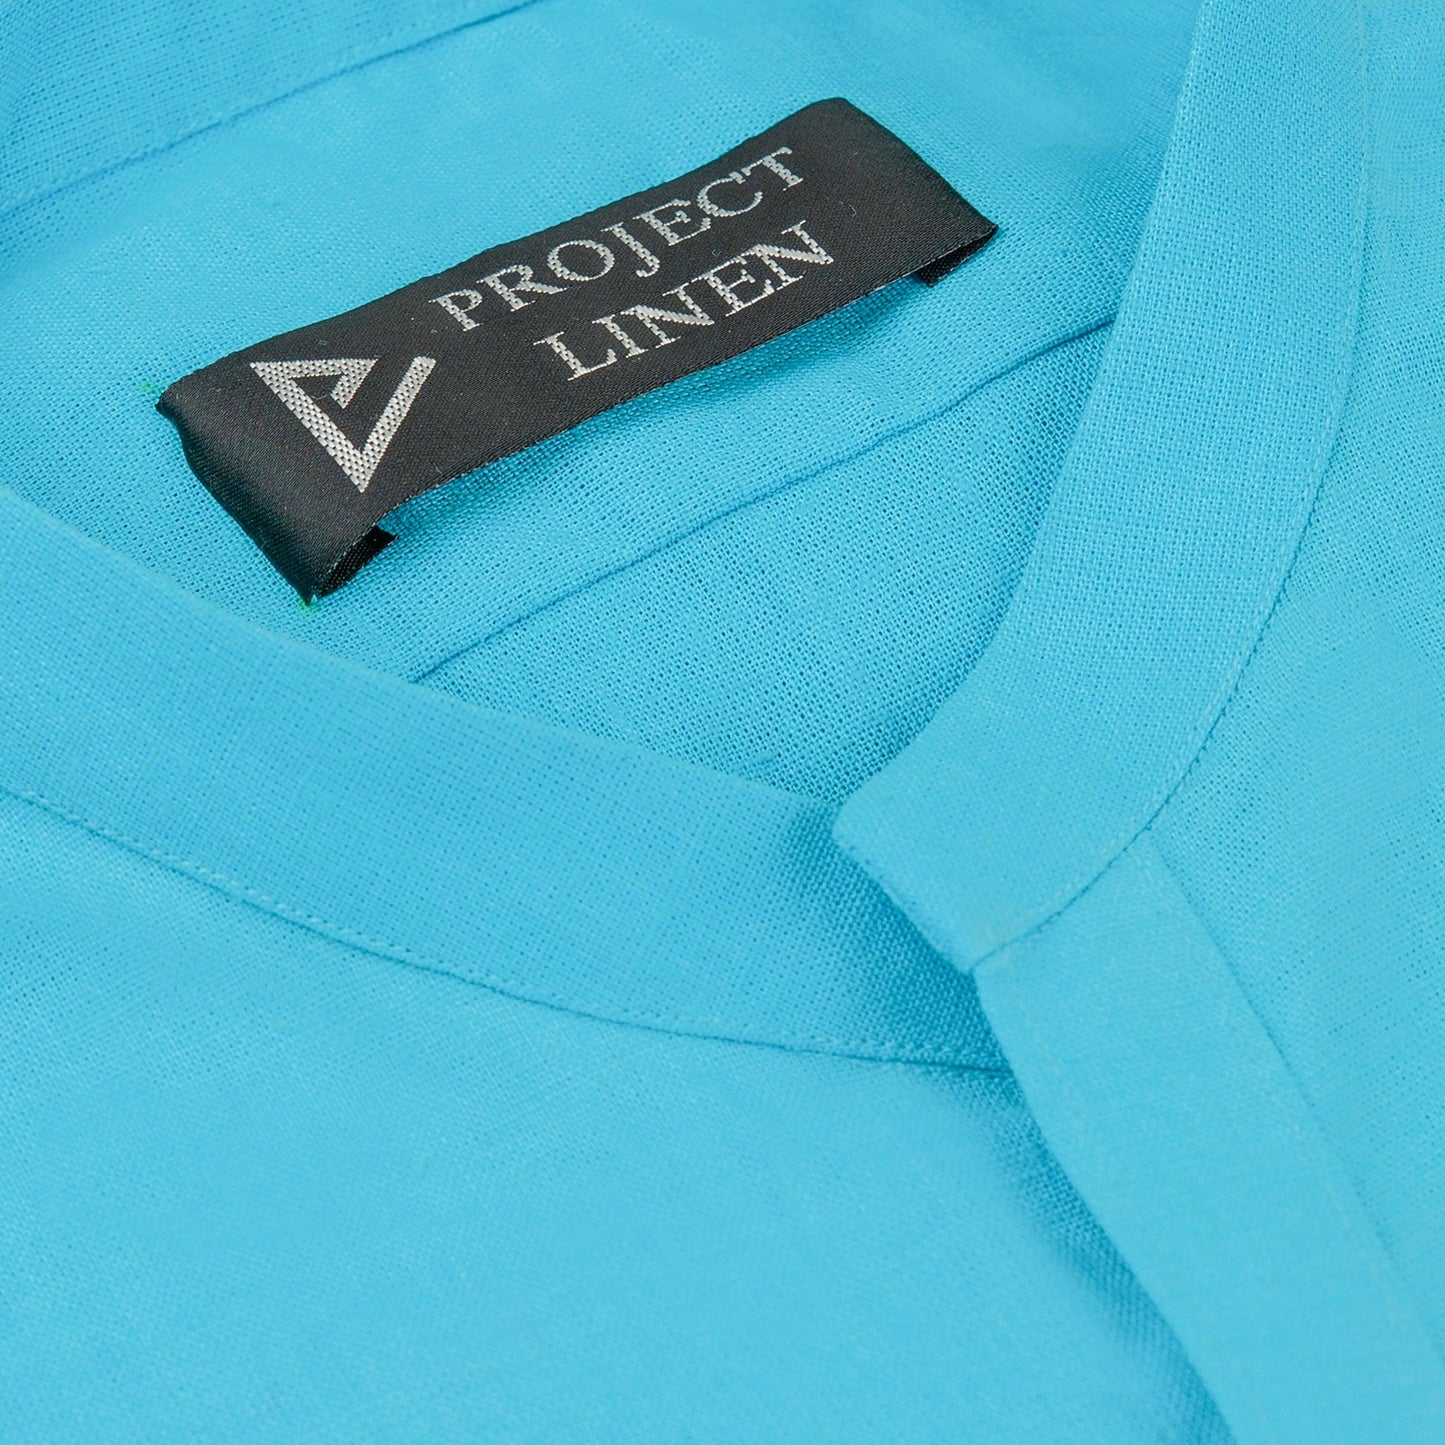 Turquoise Blue Band Collar Linen Shirt - Her's